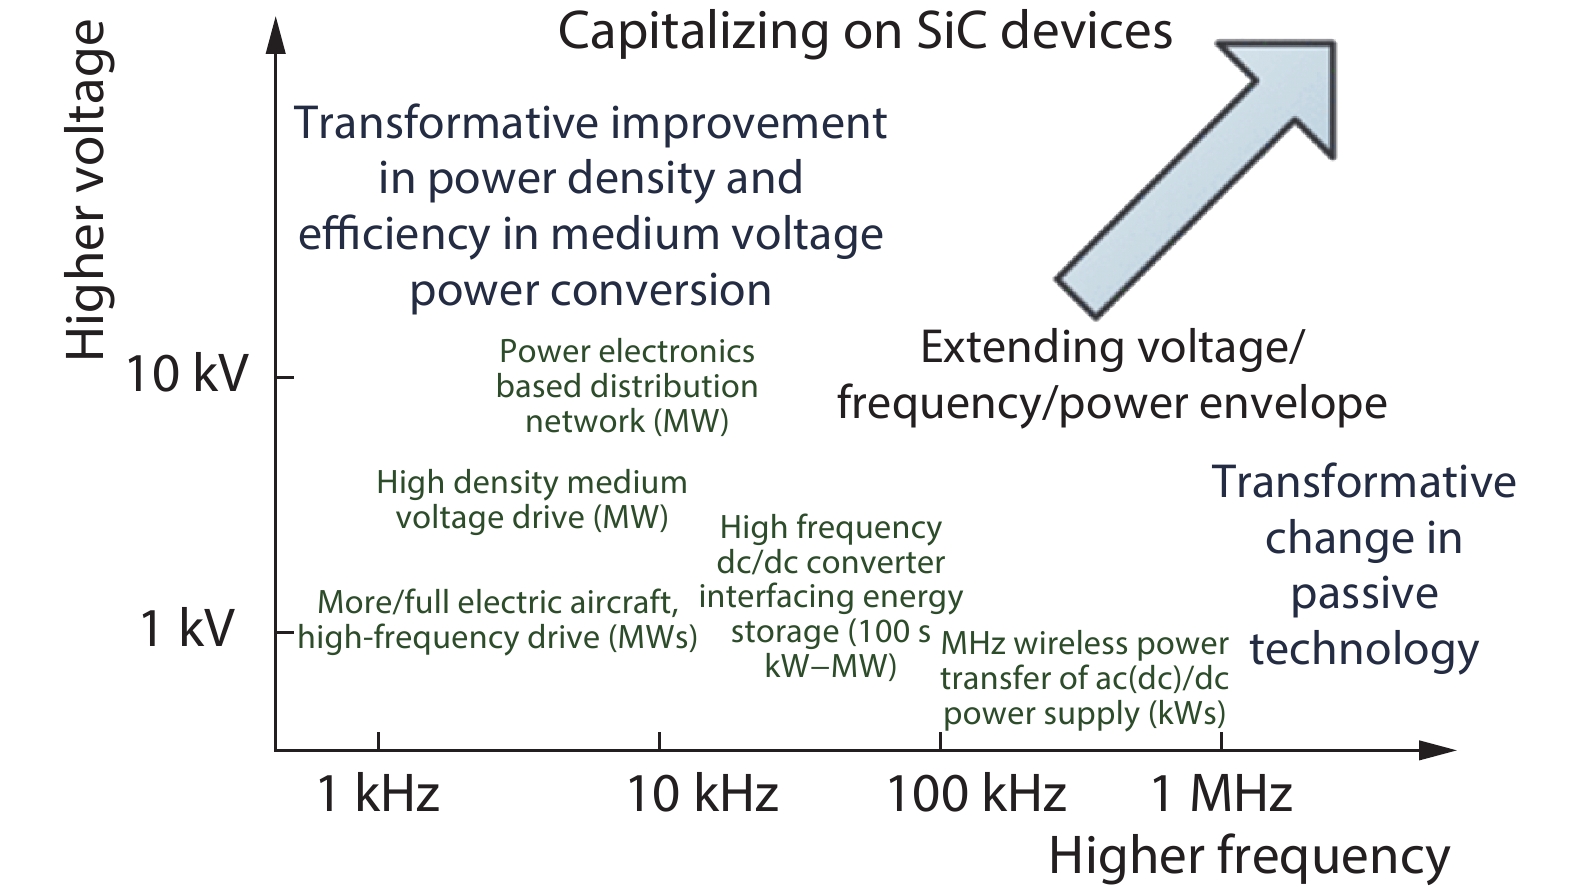 Potential application examples using SiC devices at various voltage and frequency levels[15].